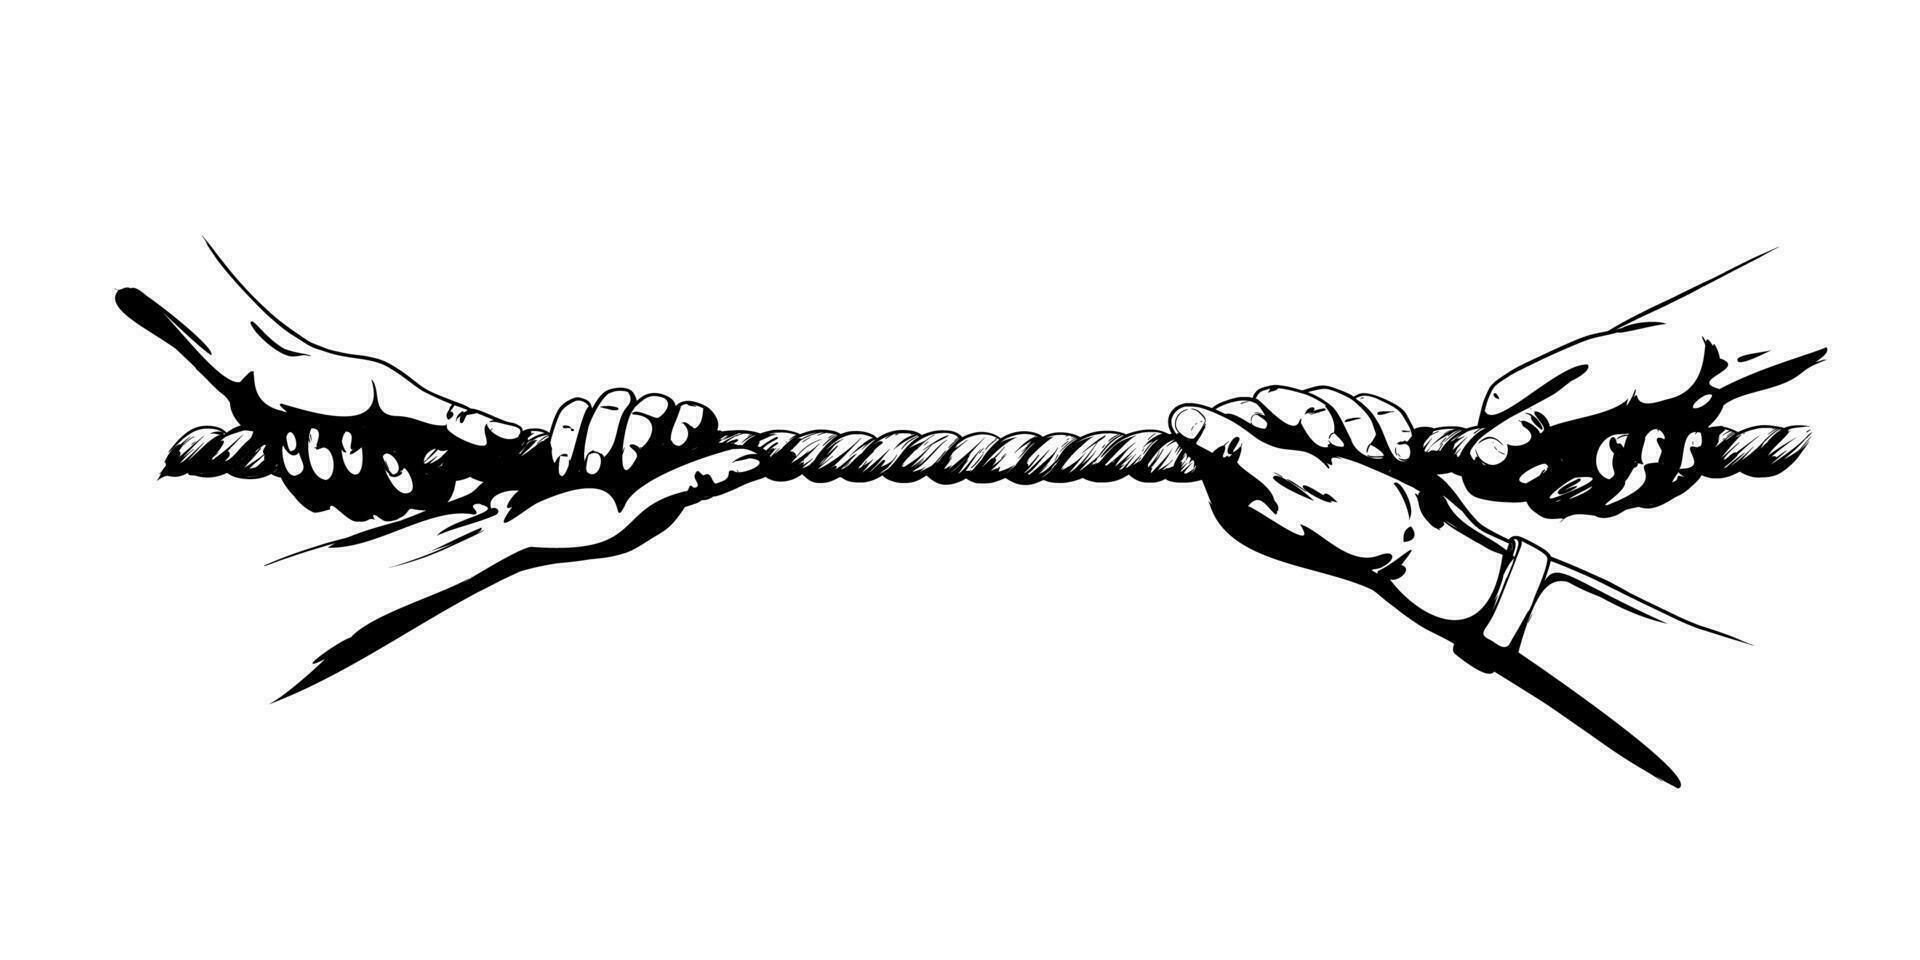 Tug war competition with rope. Hands pulling rope. Shadowed sketch hand drawn vector illustration